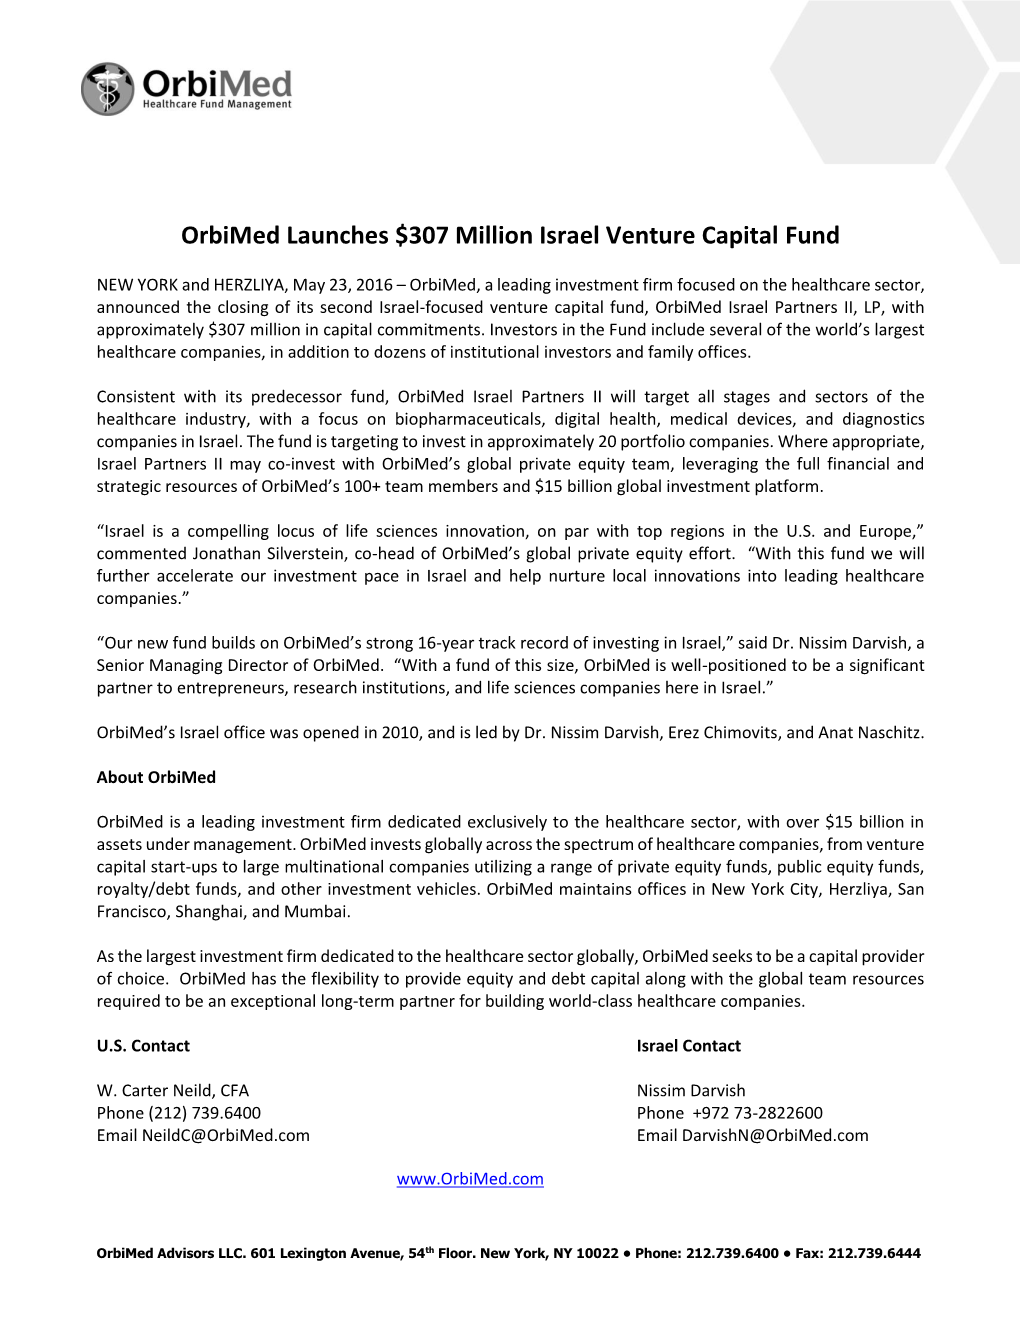 May 23, 2016 Orbimed Launches $307 Million Israel Venture Capital Fund